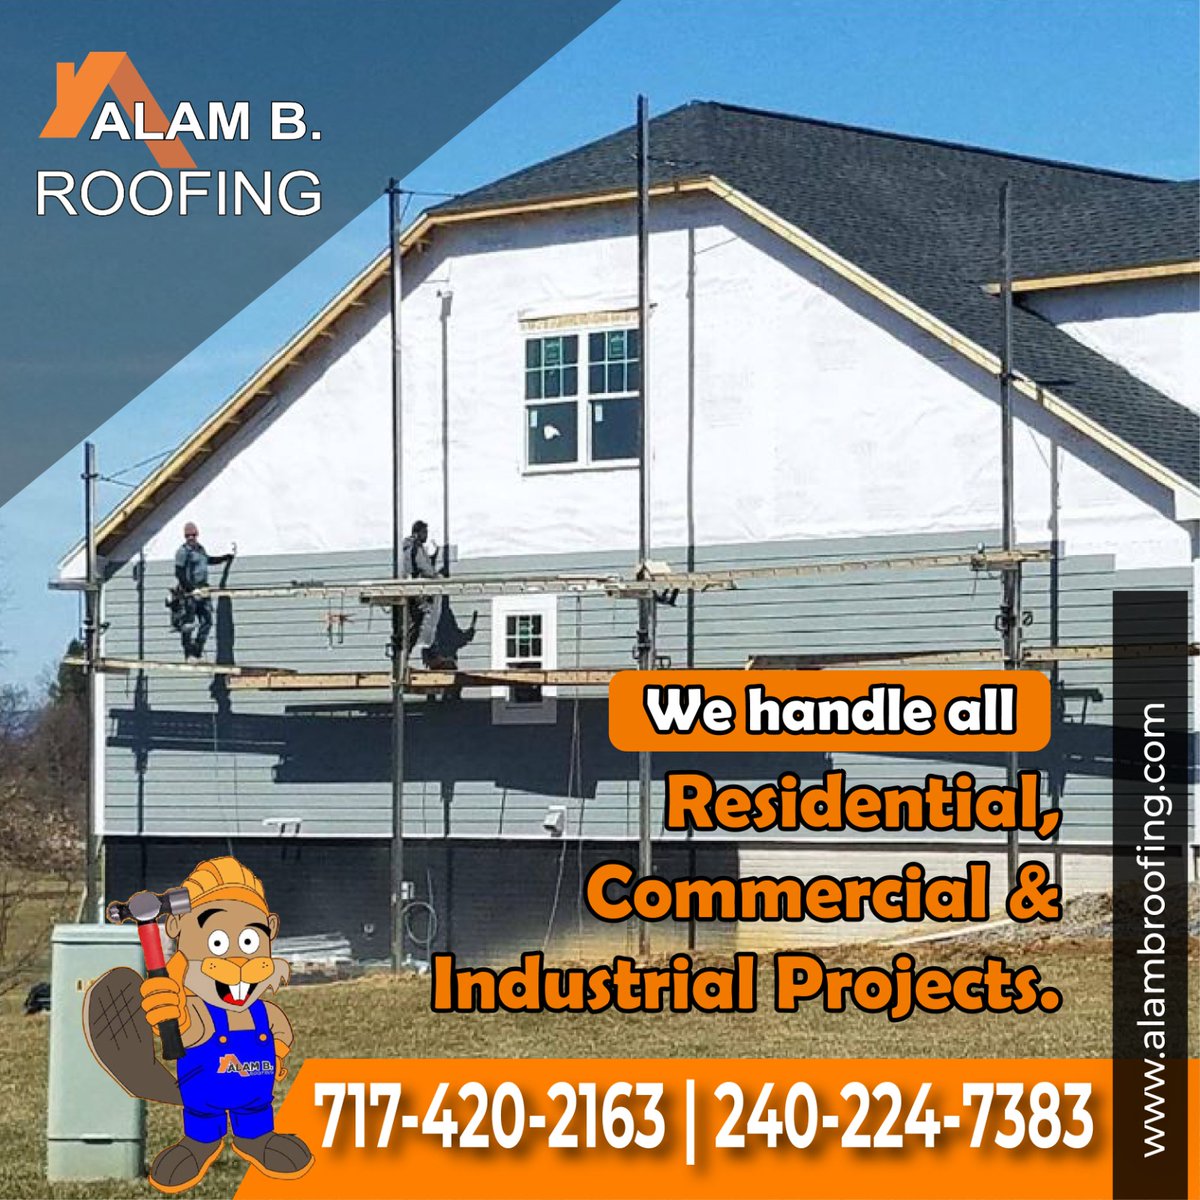 Residential & Commercial Roofing & Siding Replacement Service.
✅ Give us a call. ☎ 717-420-2163 #roofreplacement #sidingreplacement #roofingcompany #happyclient #homeimprovement